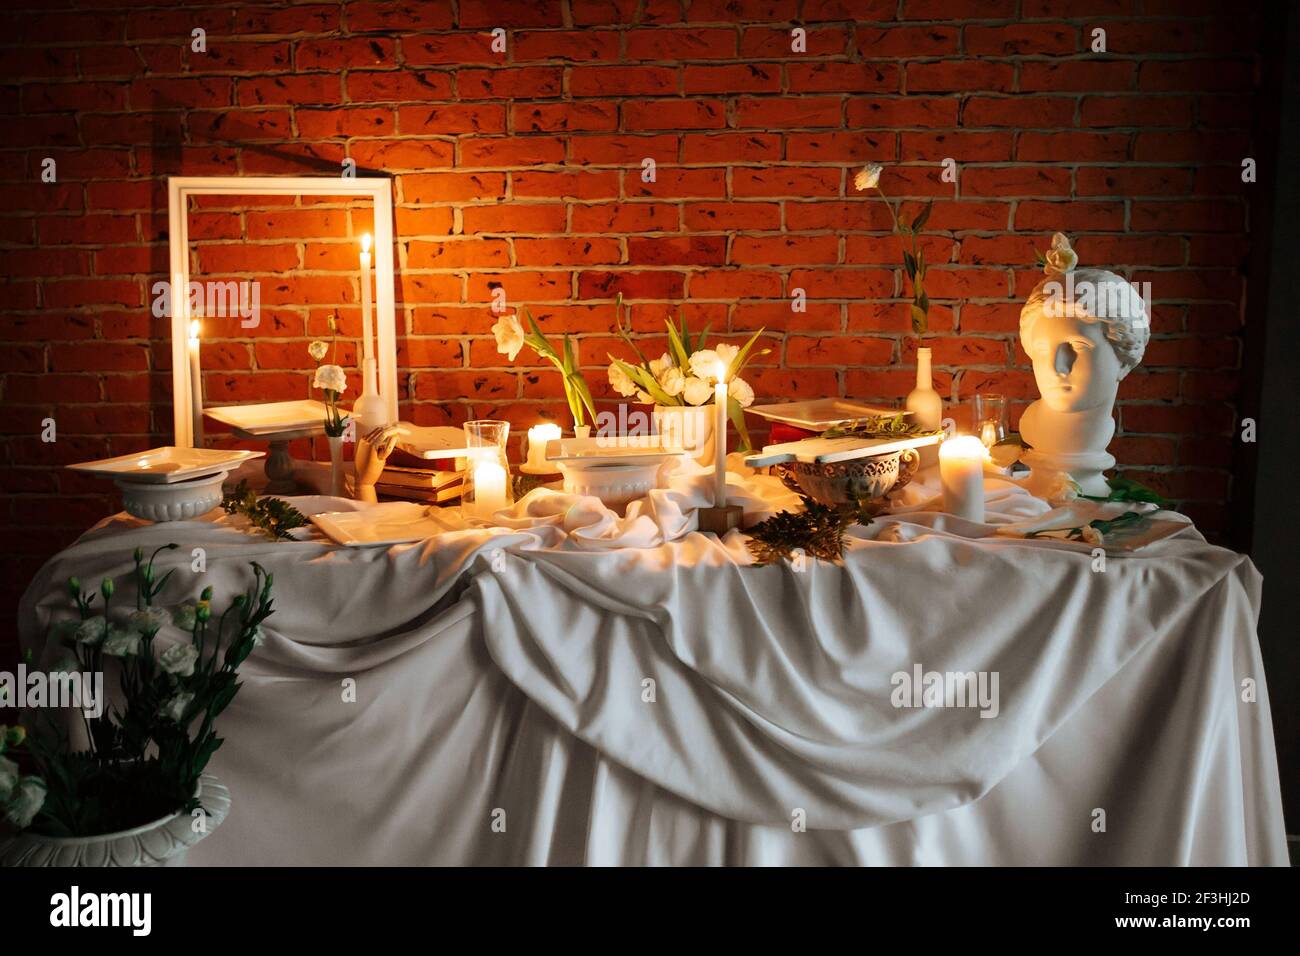 Side view on decorated table for a banquet Stock Photo